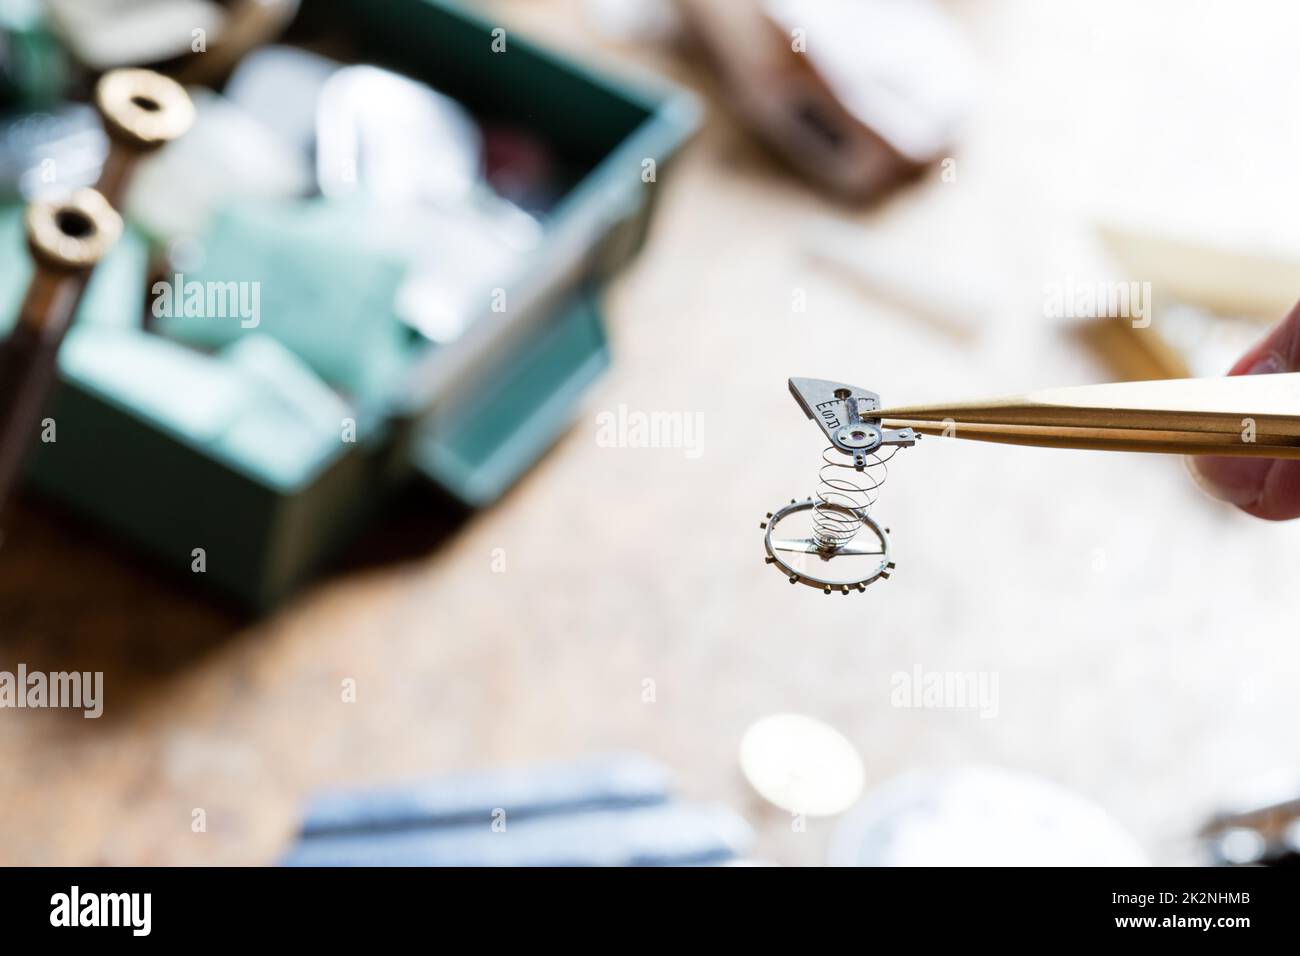 Watchmaker or clockmaker holding a watch spring in tweezers Stock Photo